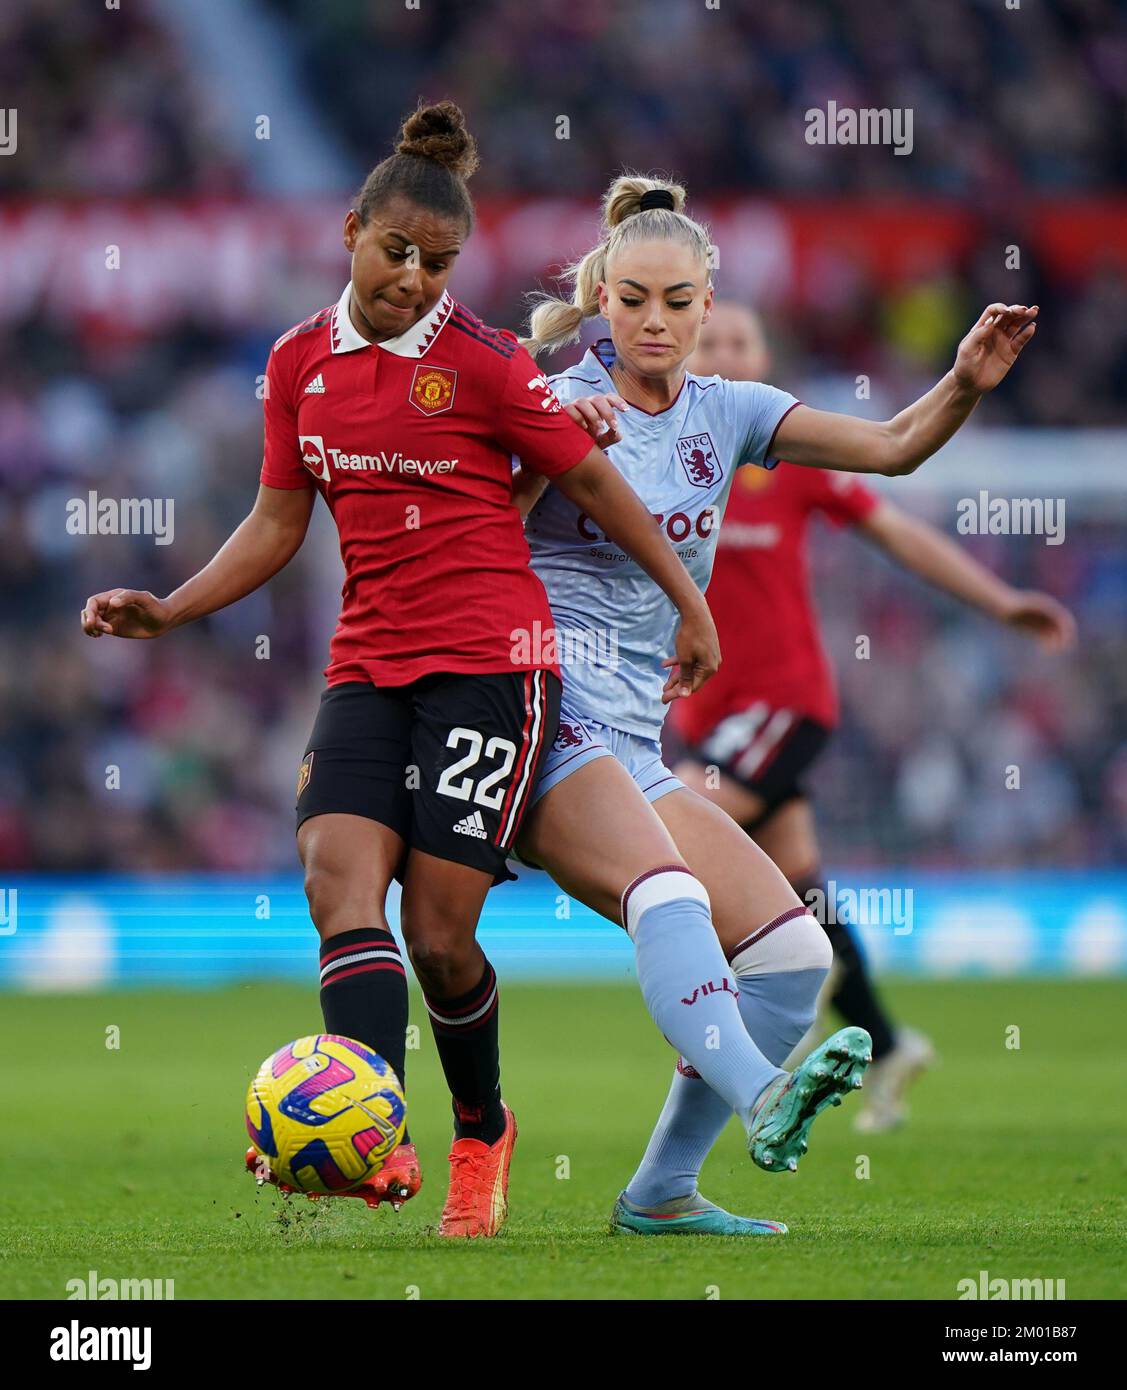 Manchester United's Nikita Parris (left) and Aston Villa's Alisha Lehmann battle for the ball during the Barclays Women's Super League match at Old Trafford, Manchester. Picture date: Saturday December 3, 2022. Stock Photo